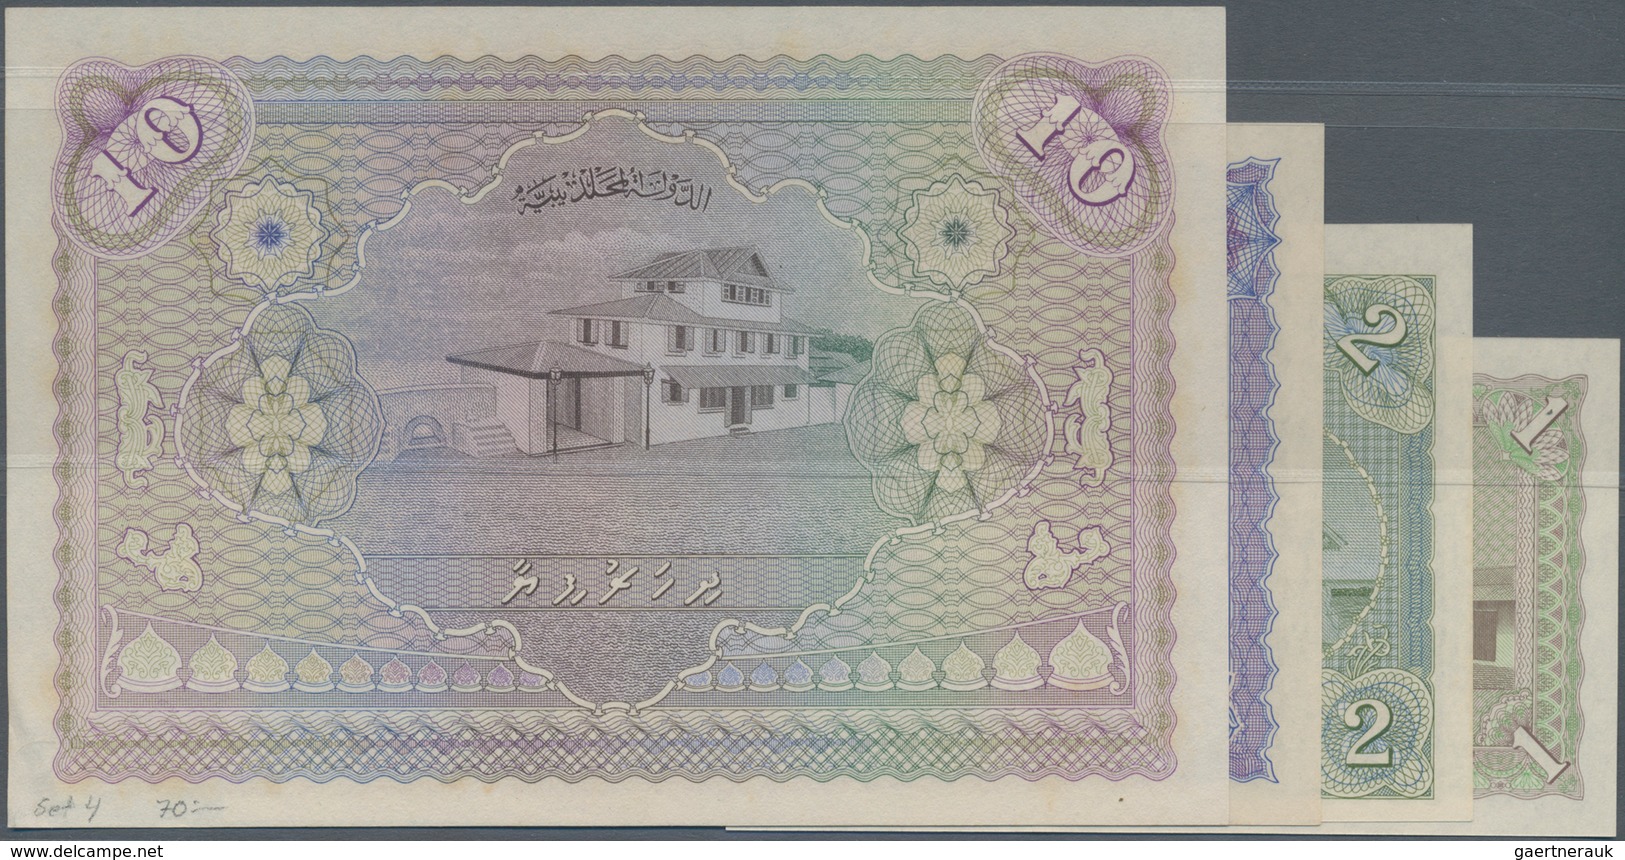 Maldives / Malediven: Lot With 4 Banknotes 1, 2 And 5 Rupees 1980 P.2b, 3b, 4b In UNC And 10 Rupees - Maldivas